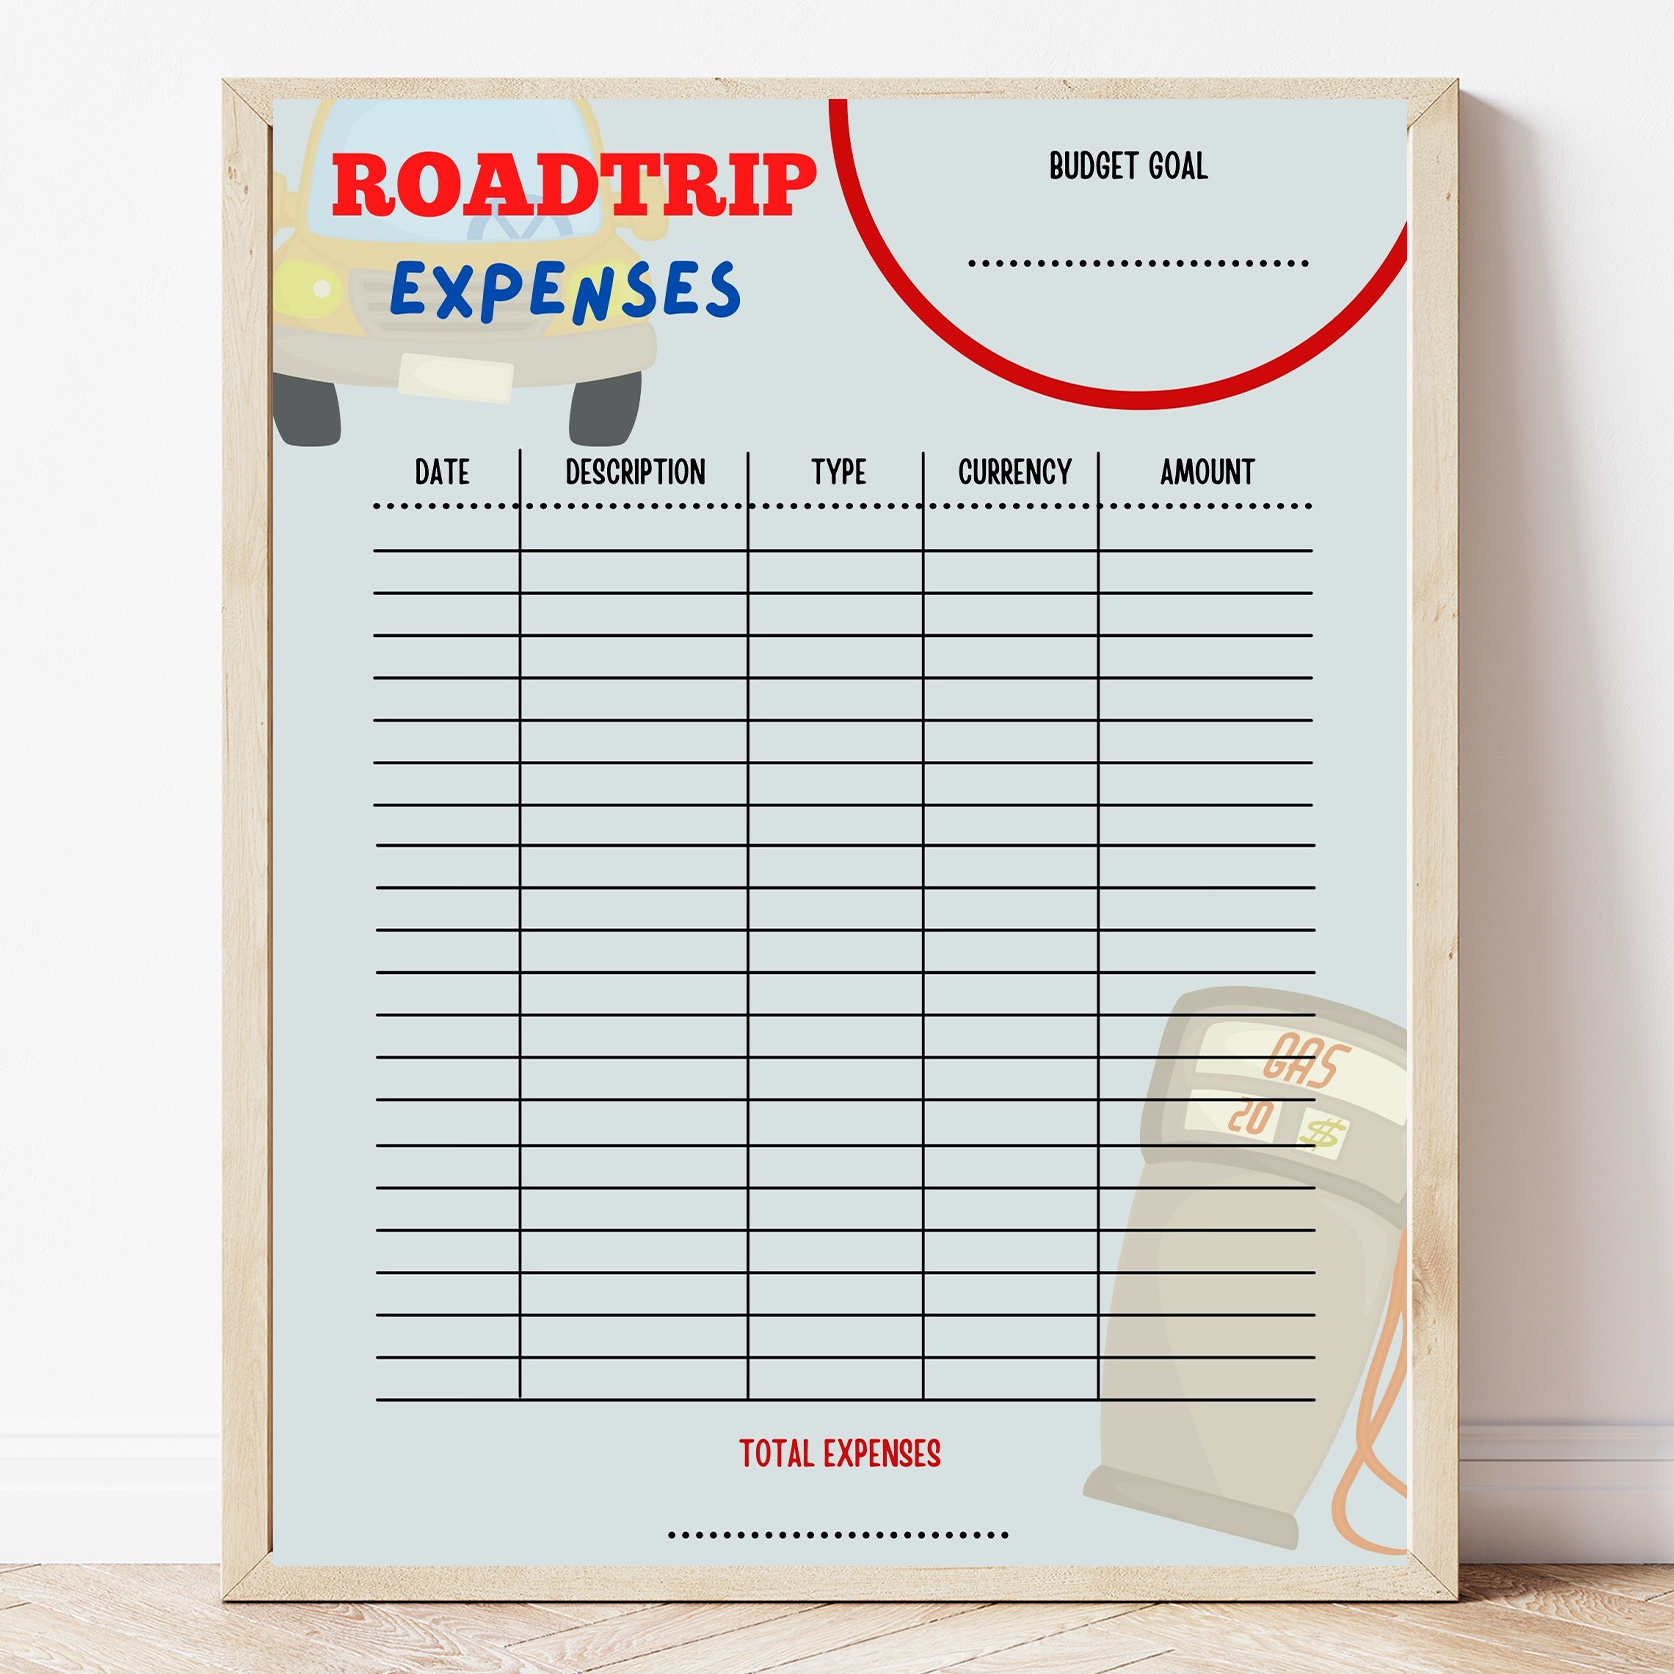 road trip planners free